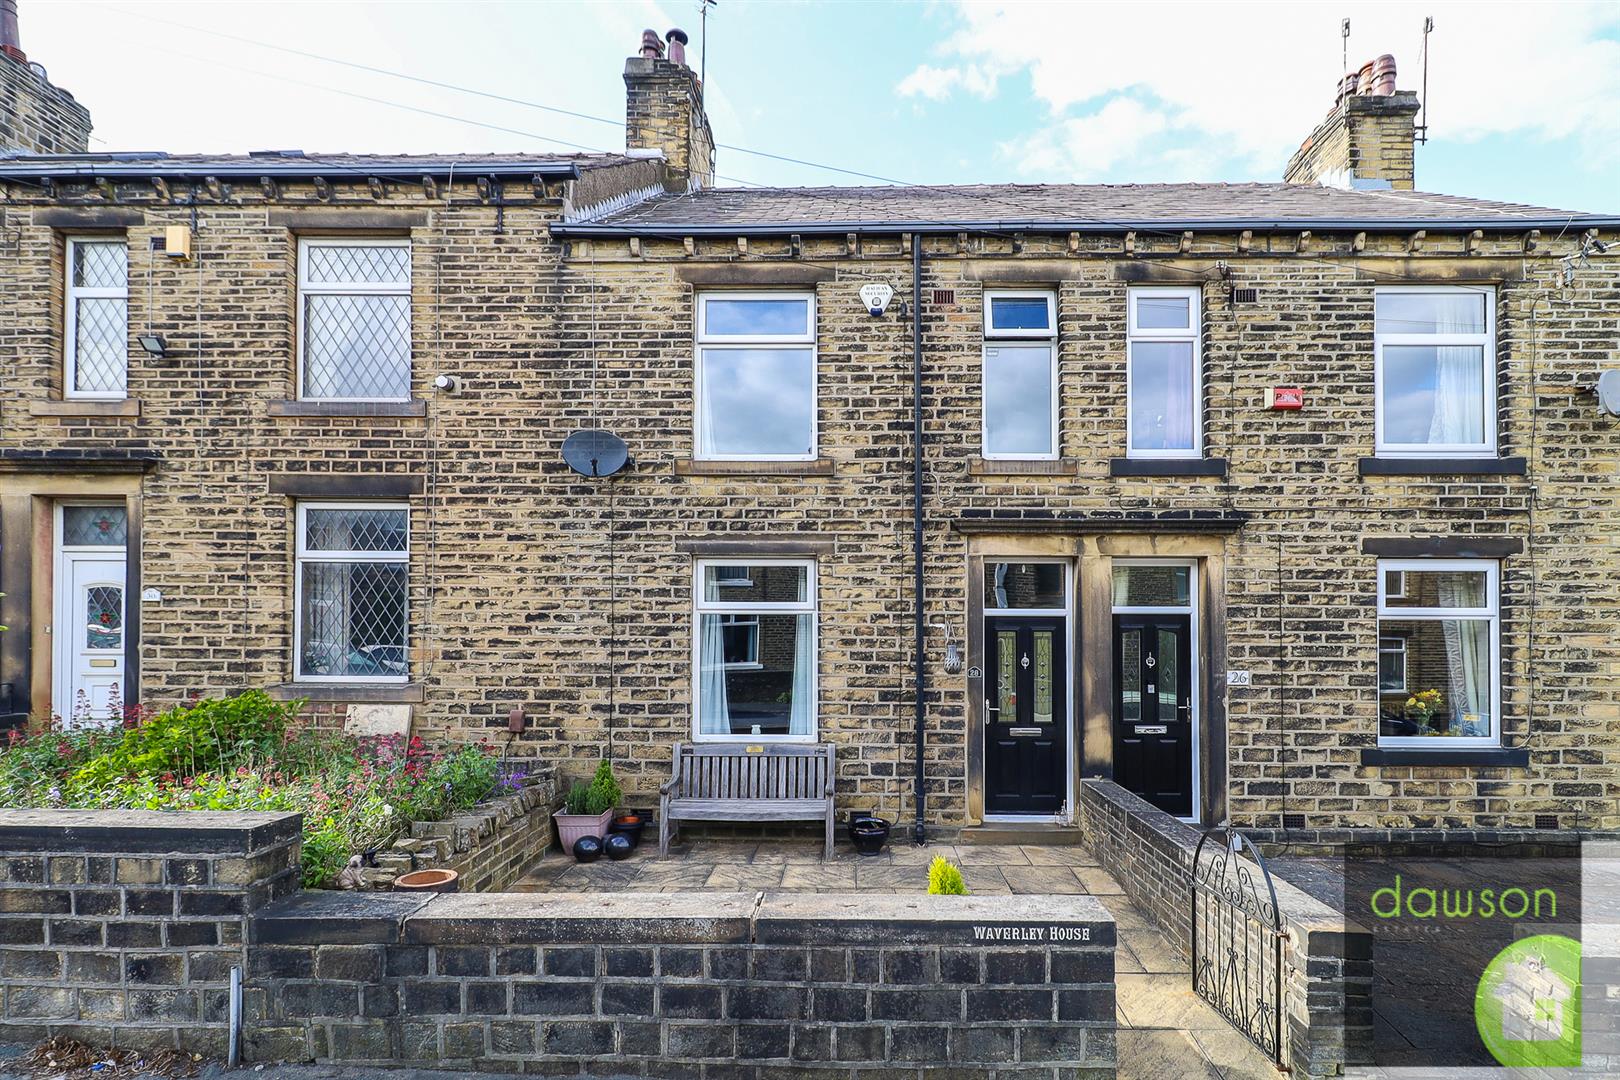 3 bed  for sale in Waverley Road, Elland, HX5 